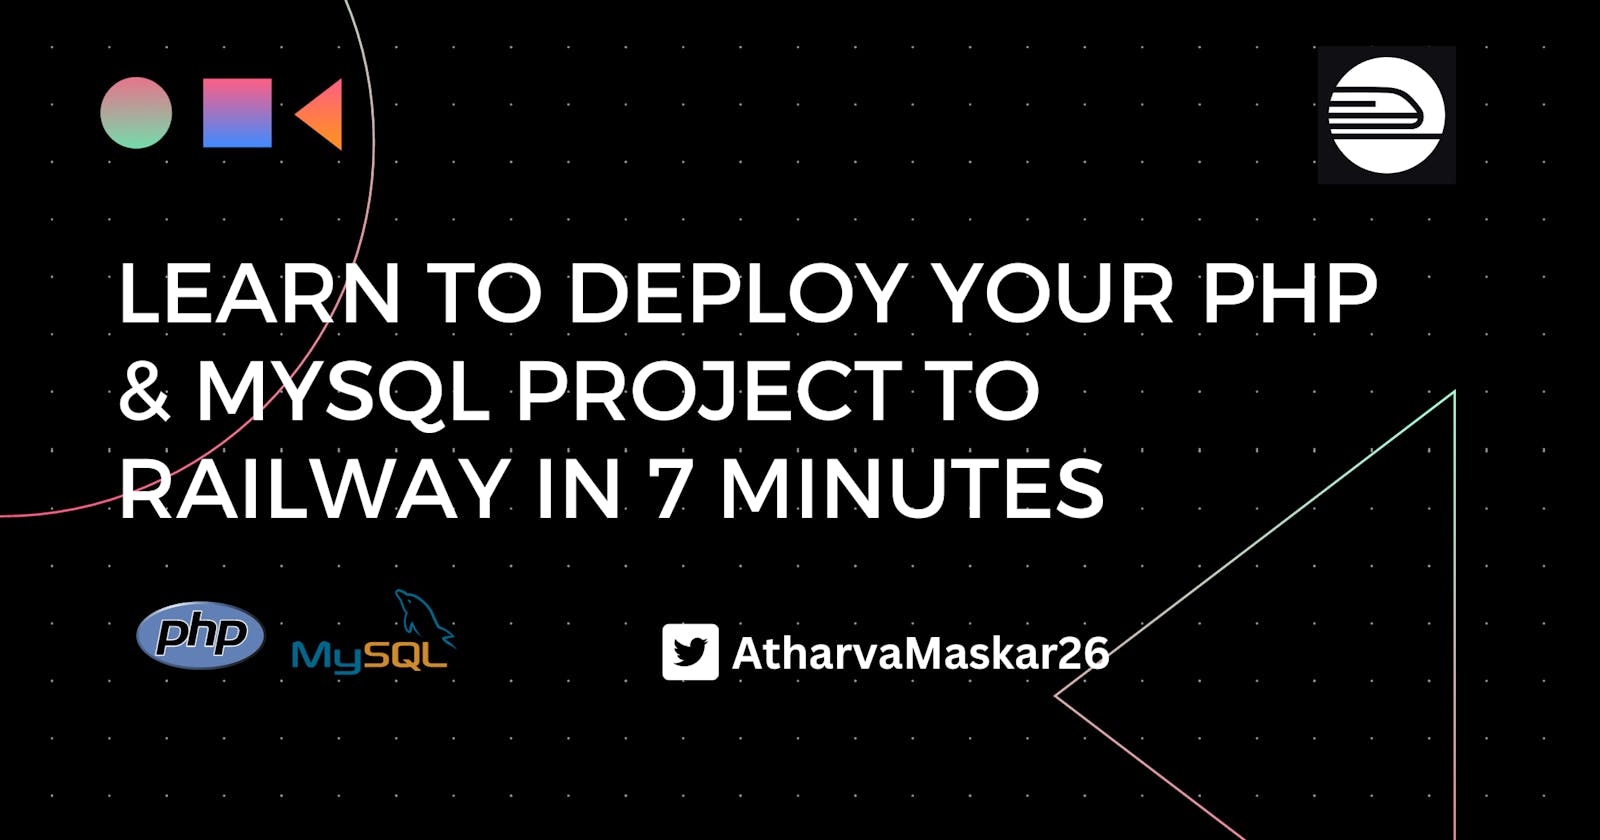 Deploy your PHP & MySQL based website in 7 minutes